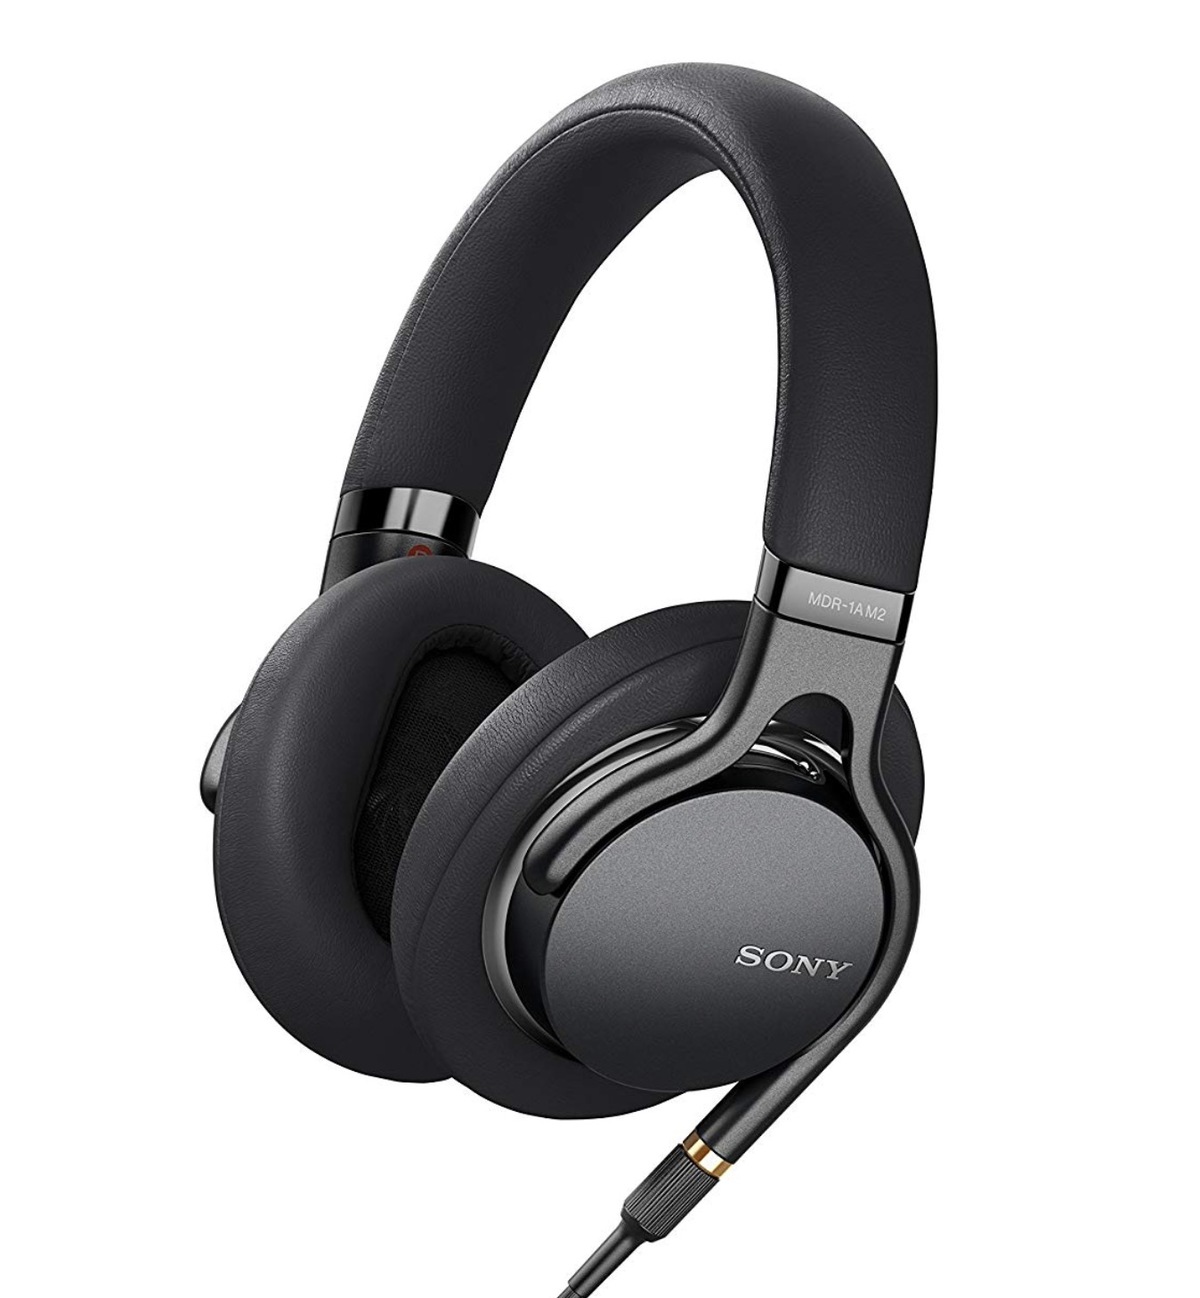 Promos : casque Sony MDR-1AM2 à 119€, microSD SanDisk 128Go Extreme à 35€